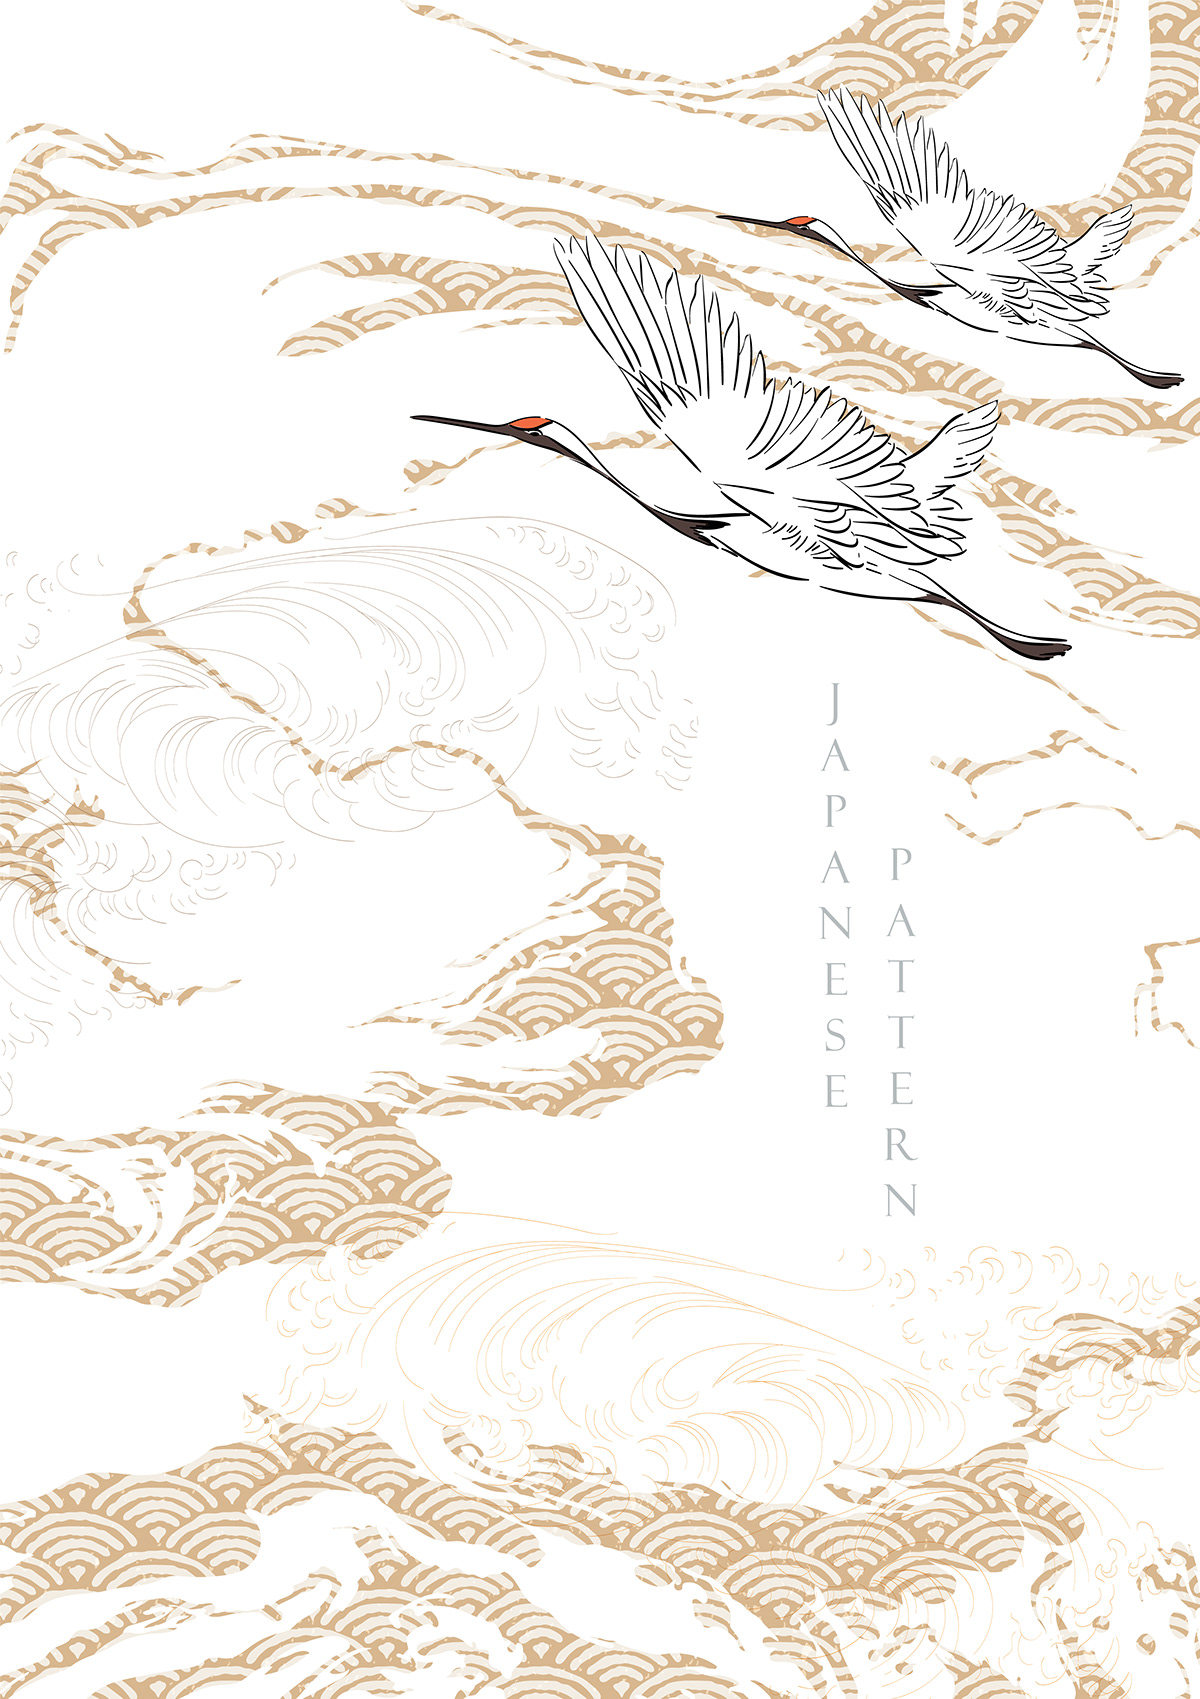 birds cranes japanese wave pattern vector traditional background asian Style